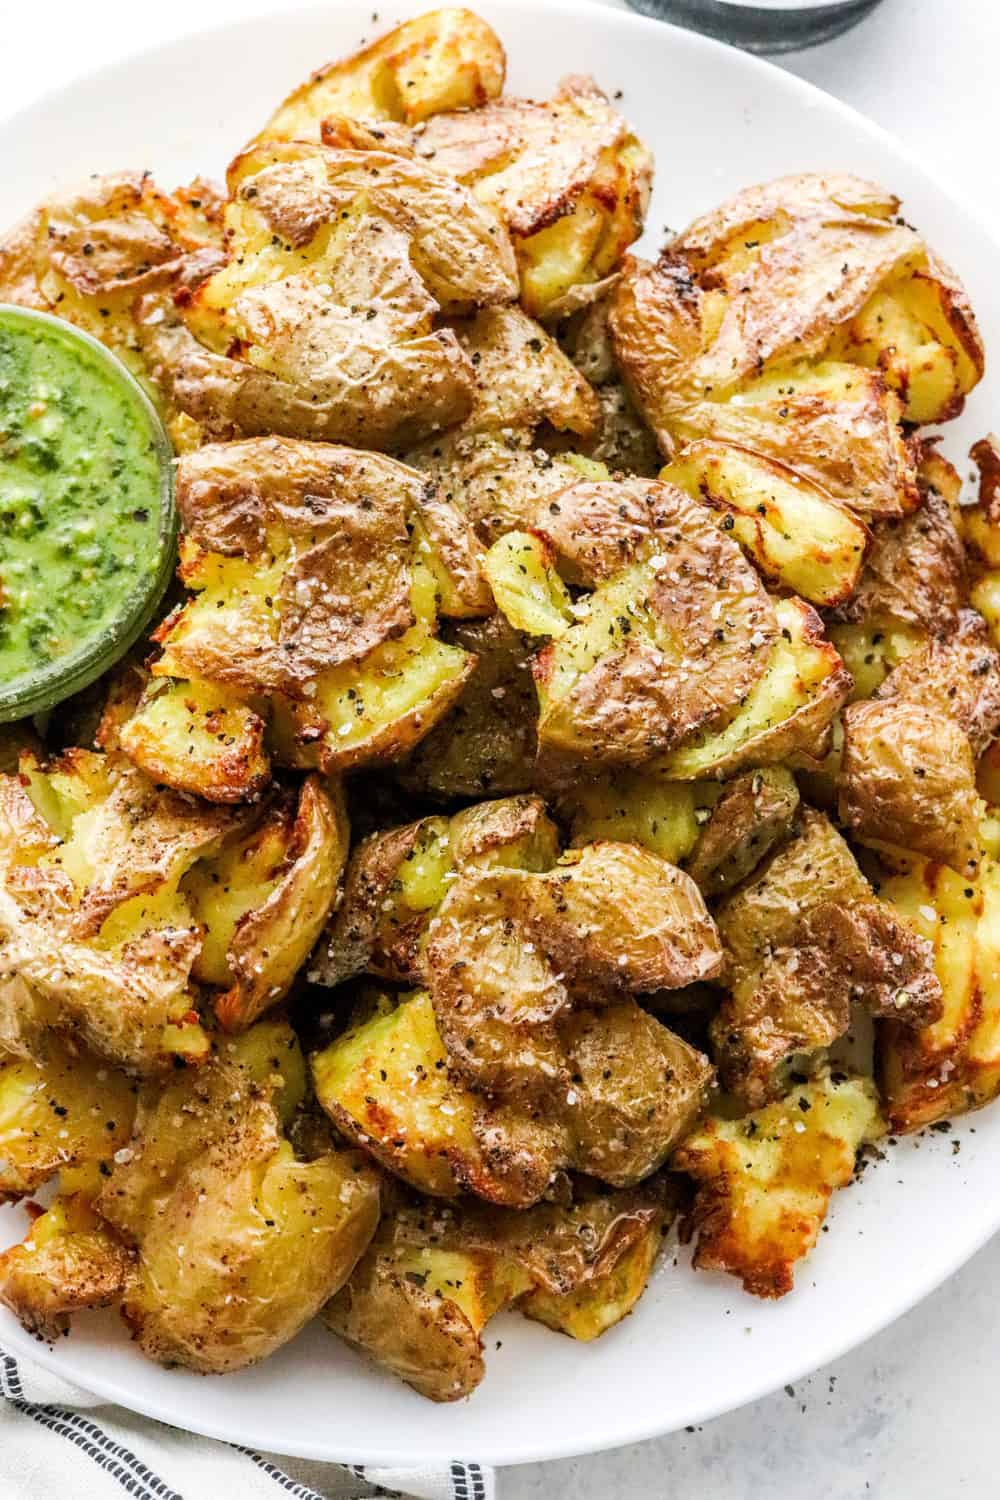 A pile of crispy cooked smashed baby potatoes on a round white plate with a small glass bowl of green pest sauce next to them on the plate.